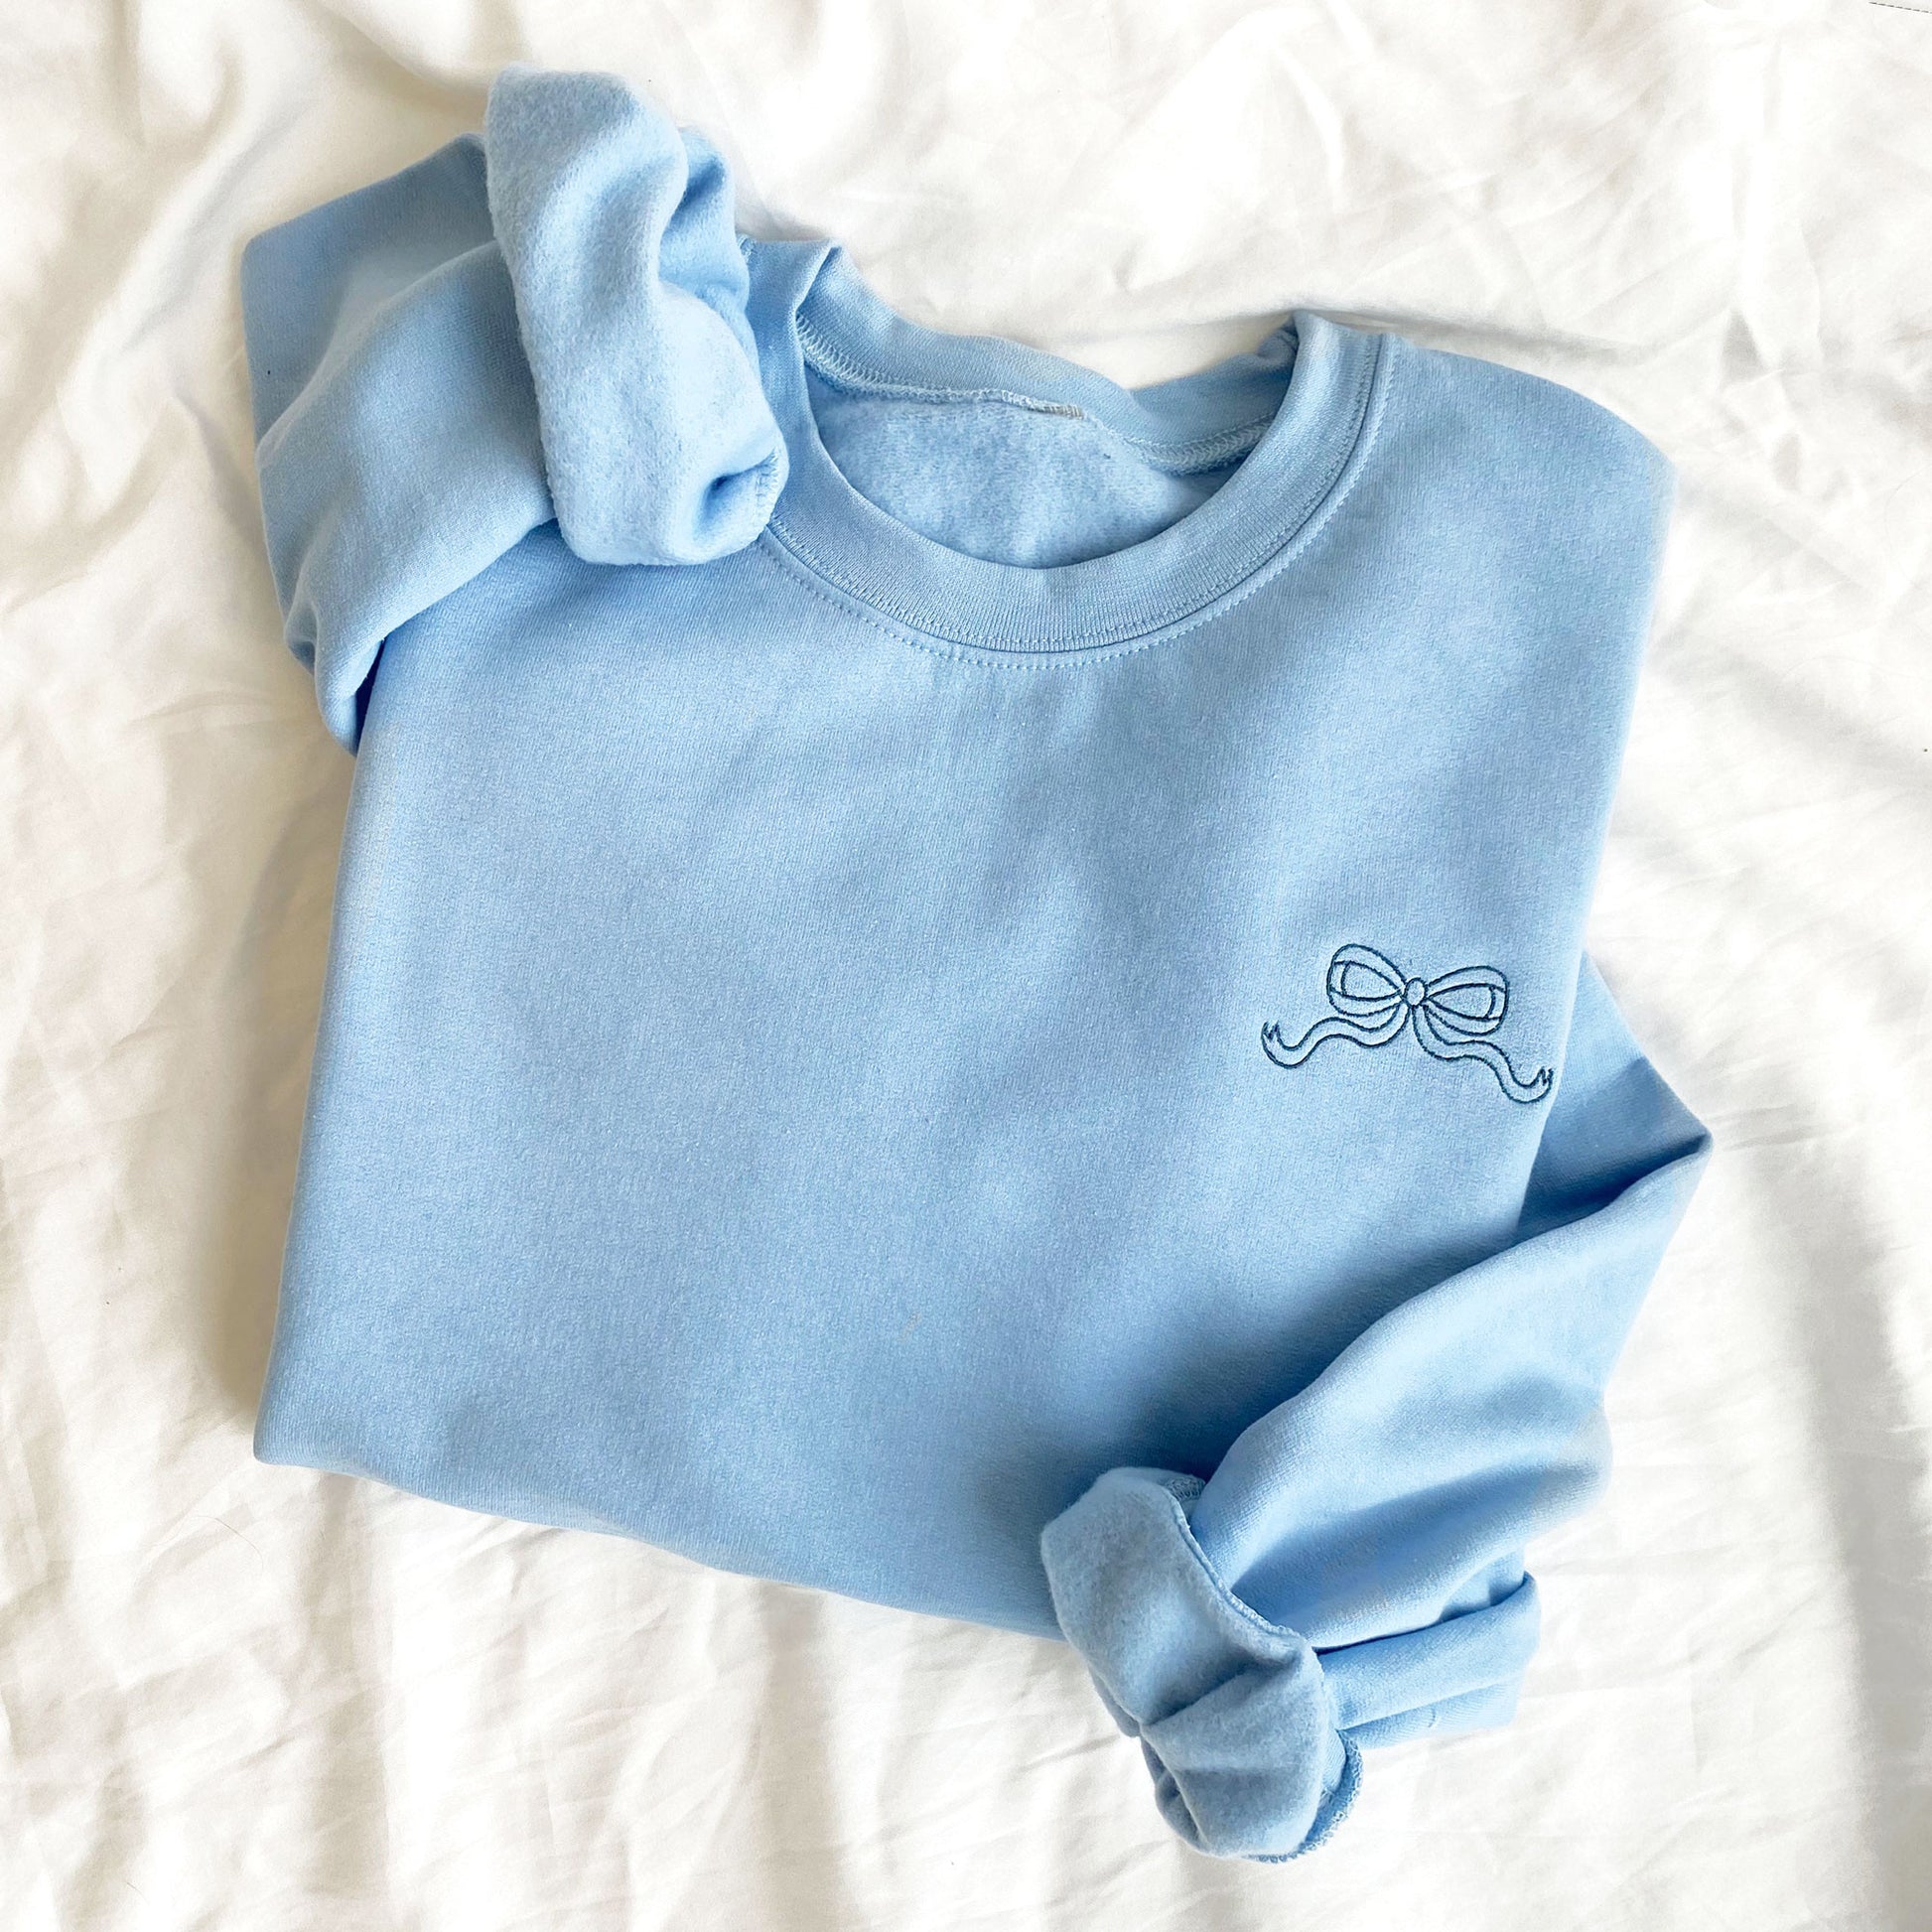 flat lay of light blue crewneck sweatshirt with mini outlined bow in blue on the left chest